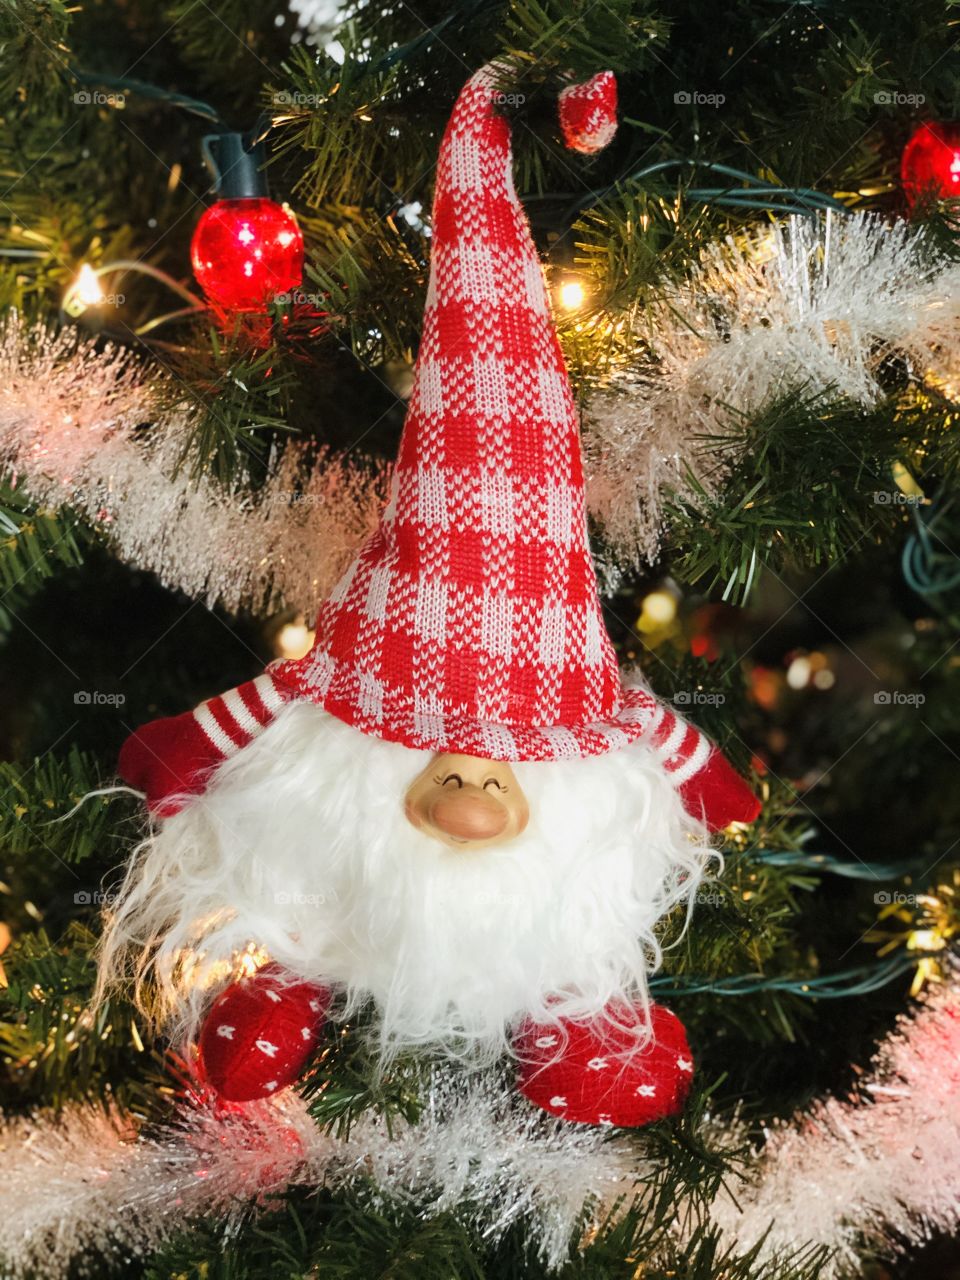 A plump gnome makes himself at home in my red and white “gnome sweet gnome” Christmas tree in Minnesota.